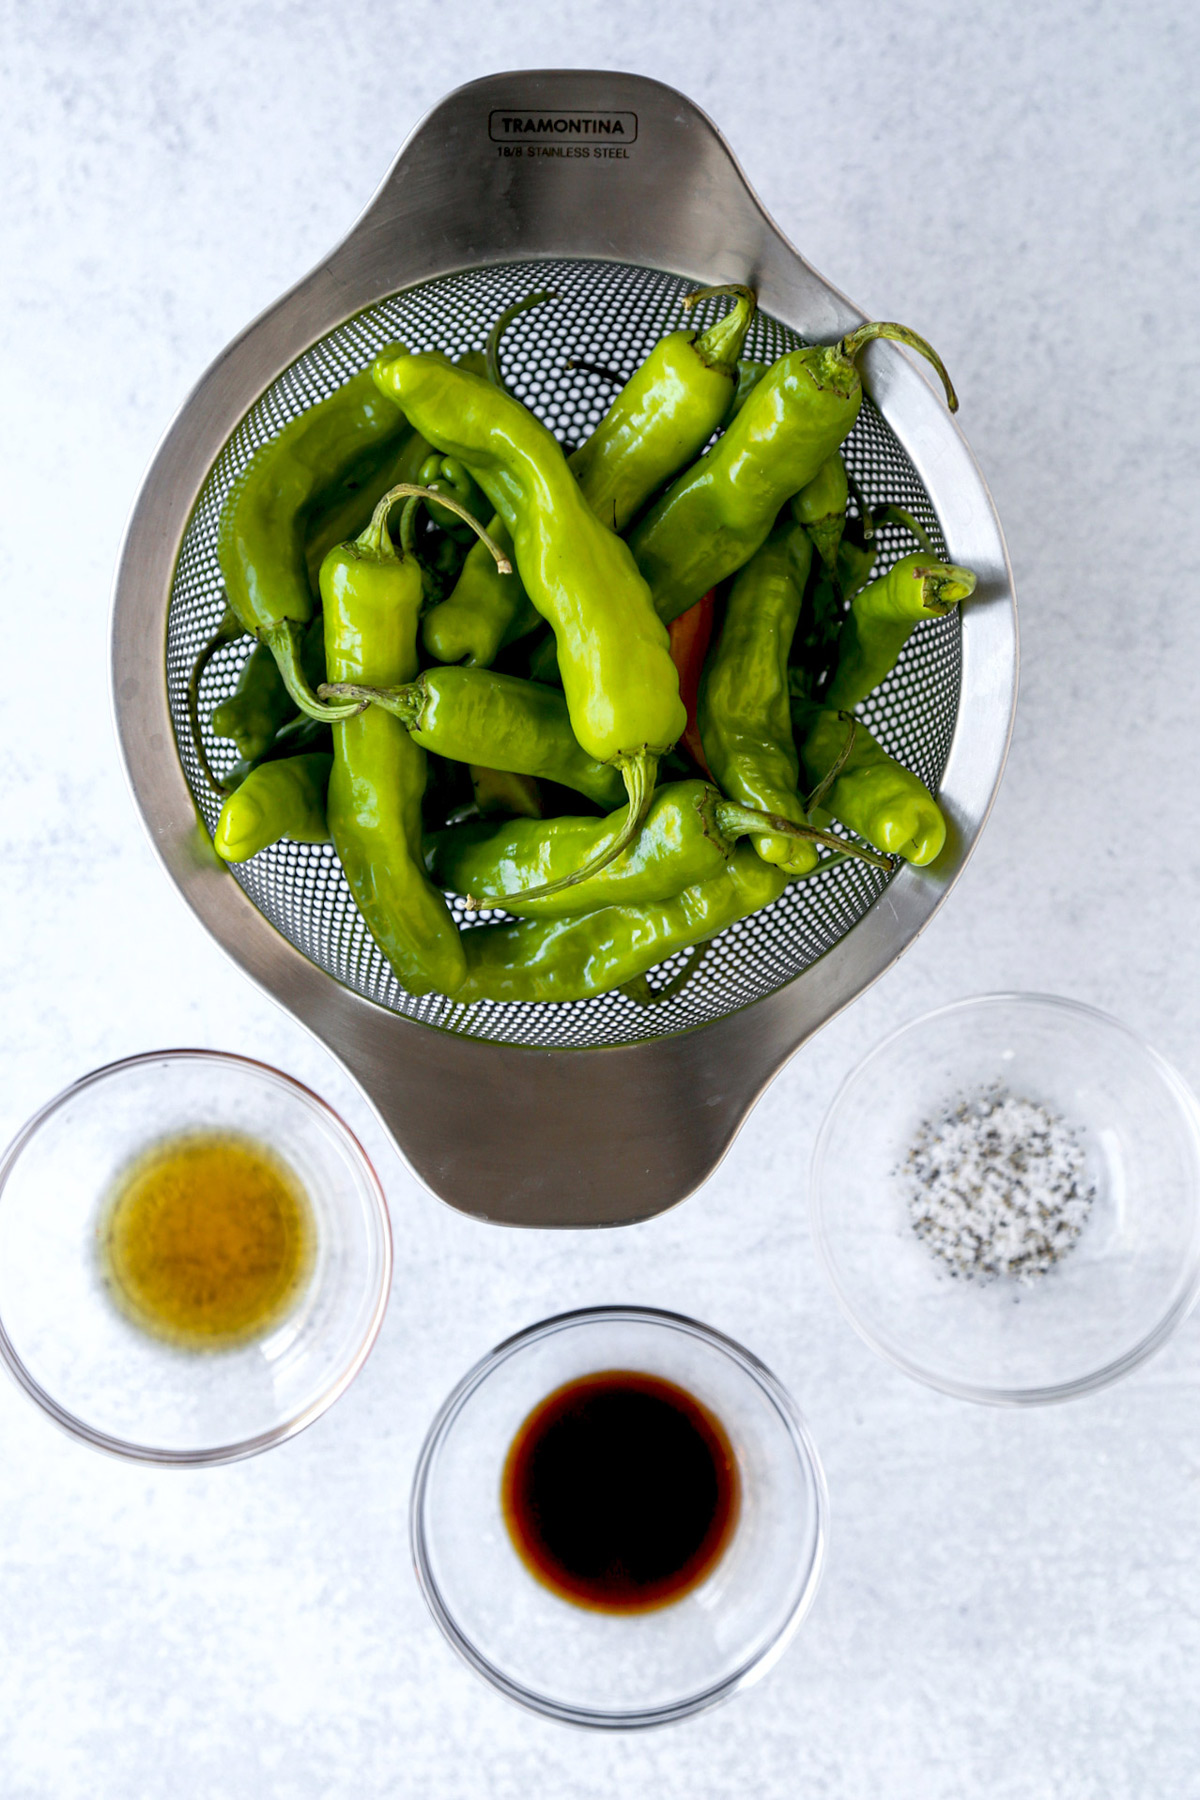 Ingredients for Shishito Peppers